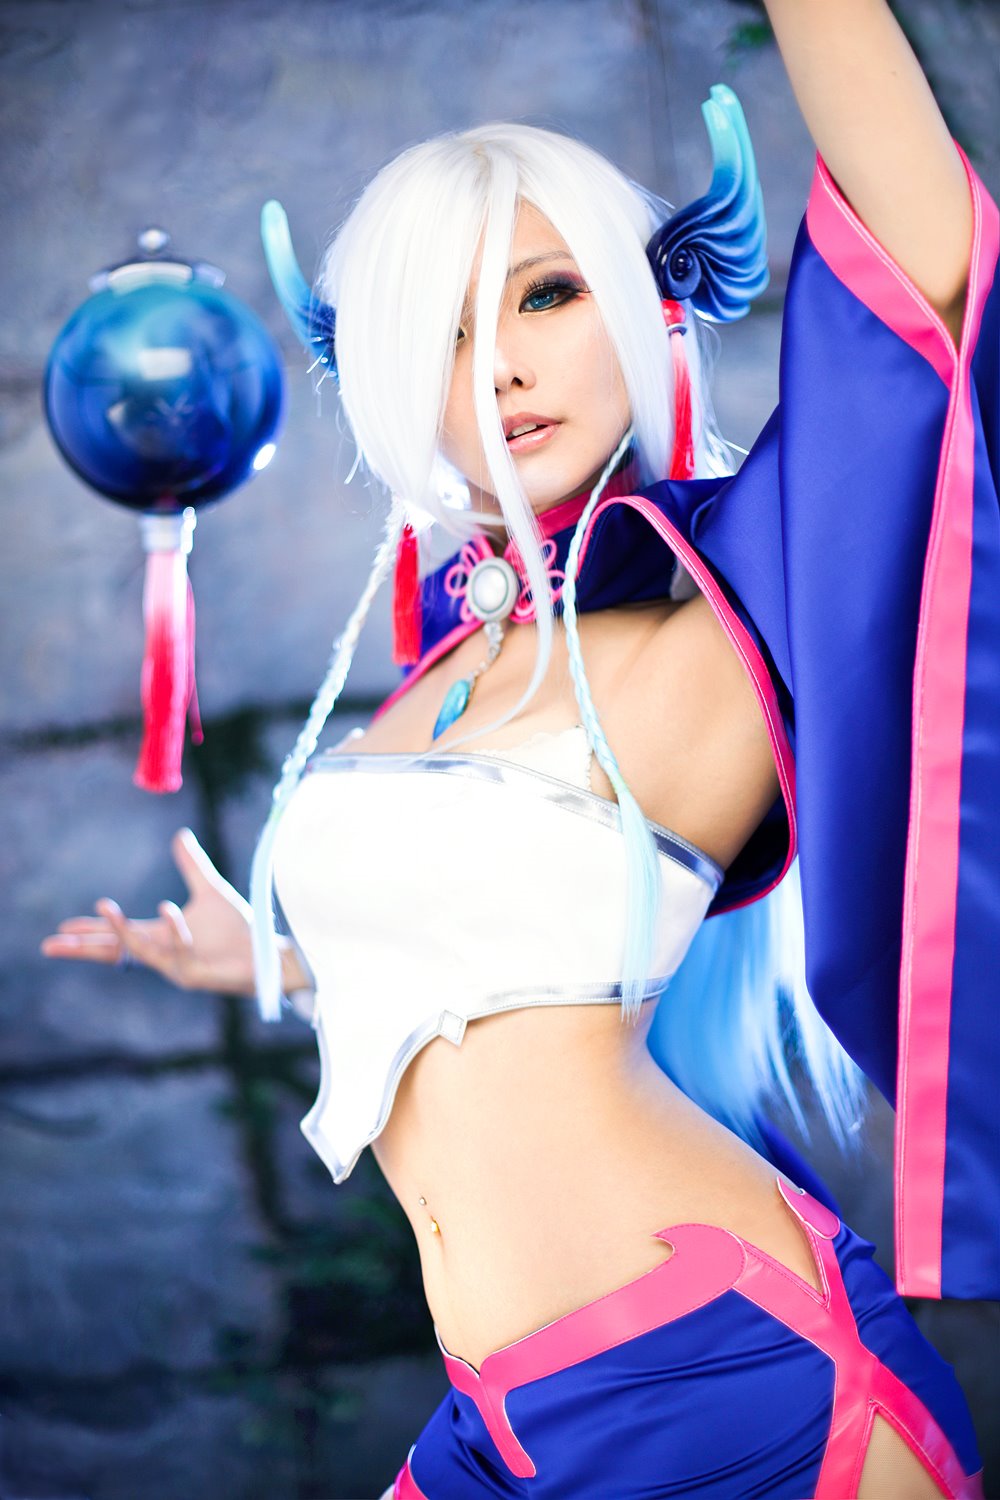 Maplestory 2 Soulbinder cosplay 6